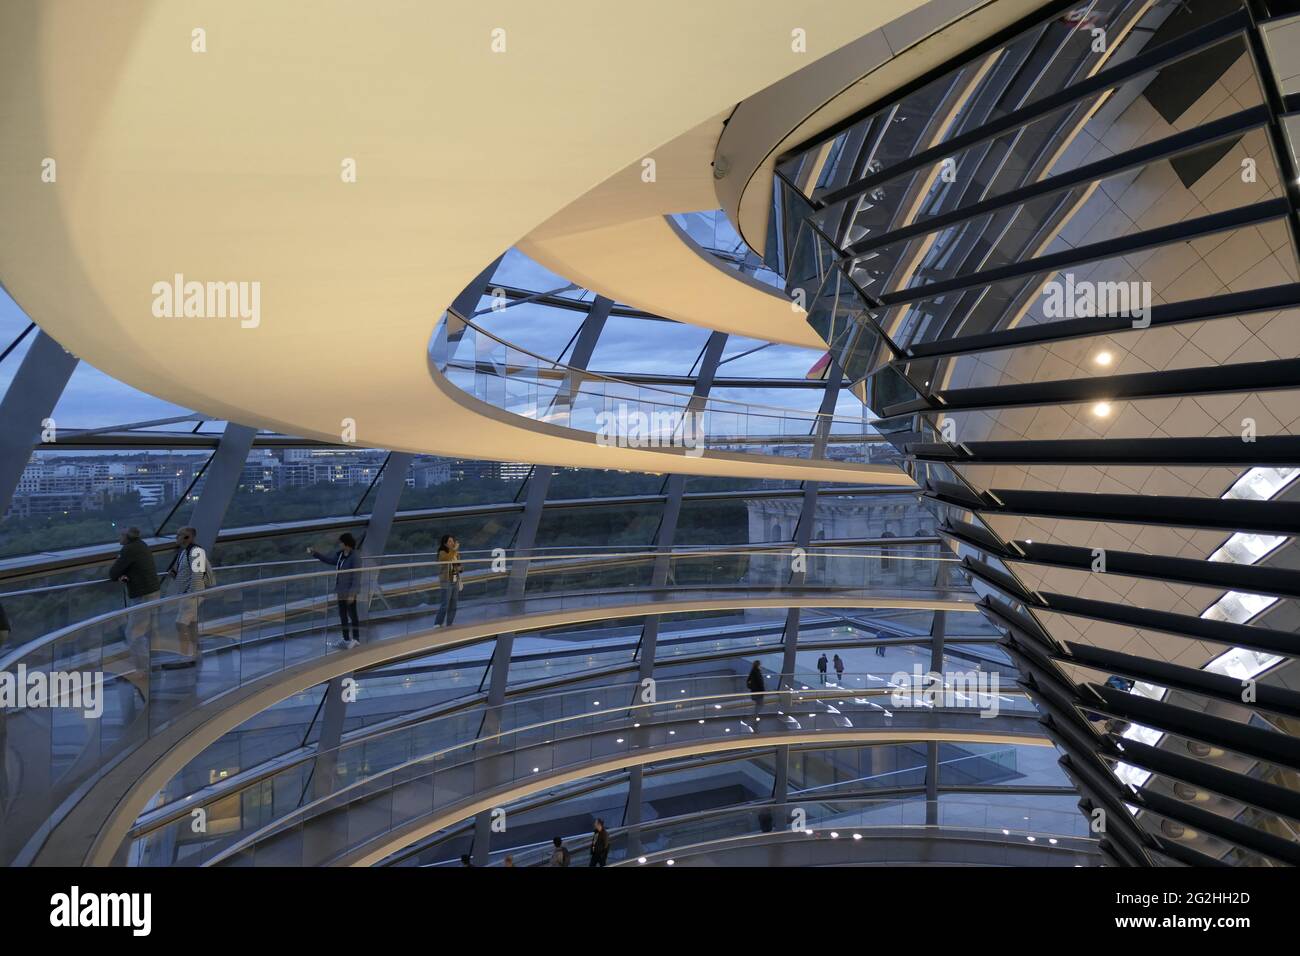 Dome Reichstag building, Bundestag, Berlin, Germany Stock Photo